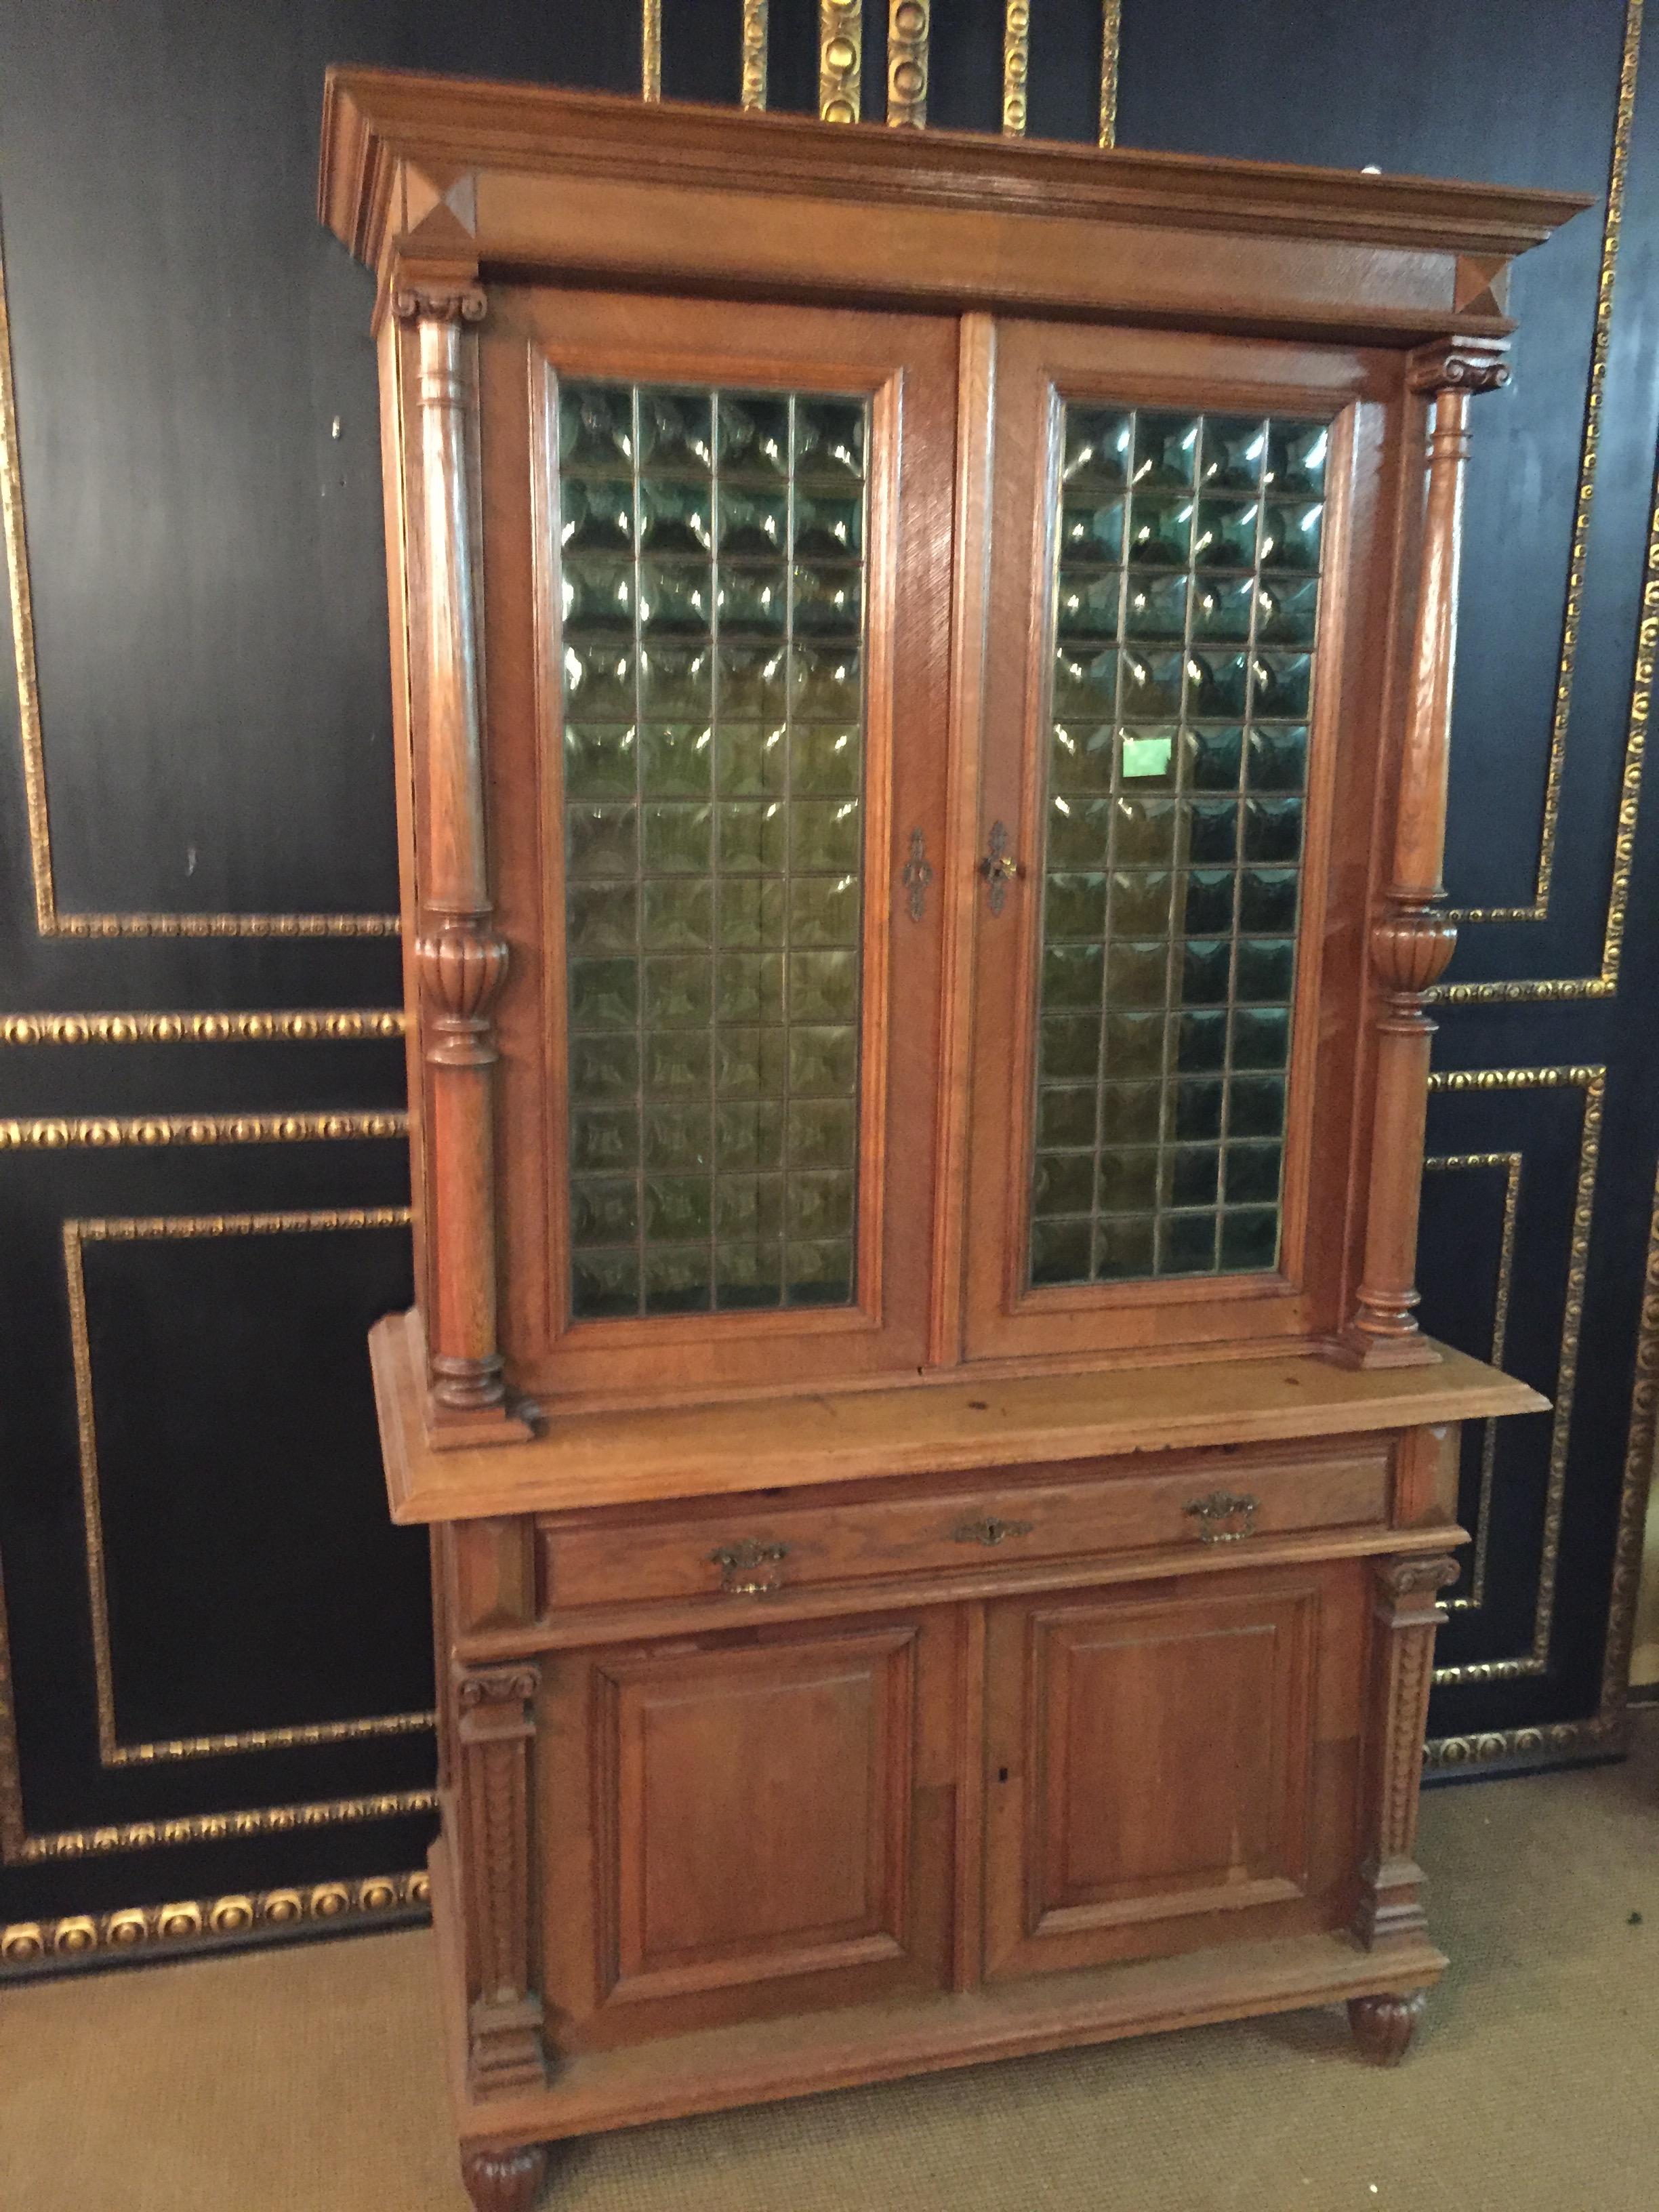 Here we offer you a truly incredible Wilhelminian cabinet with the finest epoch-style styling features.

Massive oak manufactured circa 1900 impresses among other things by its carved front, the great green glasses, one glass pane is unfortunately